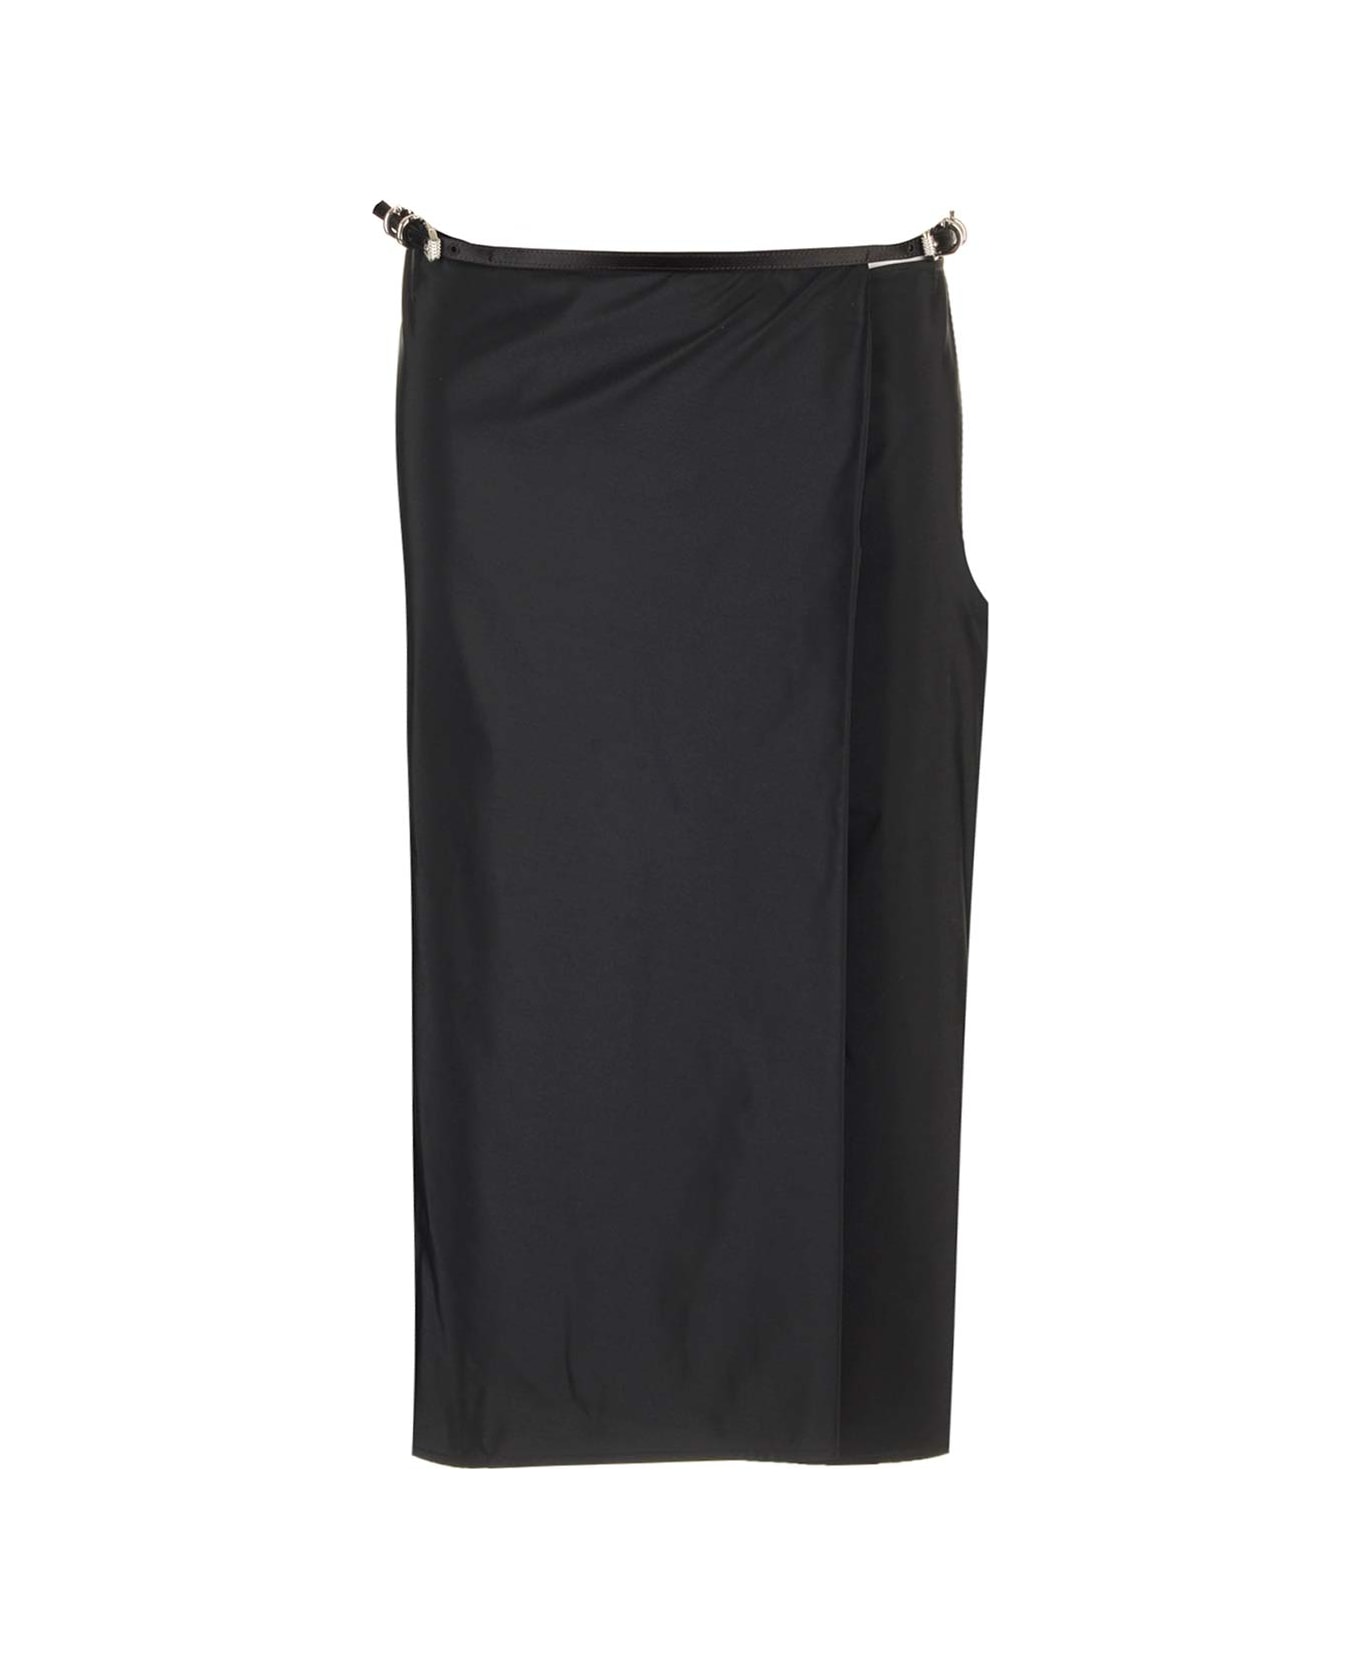 Givenchy 'voyou' Wrap Skirt - Black スカート